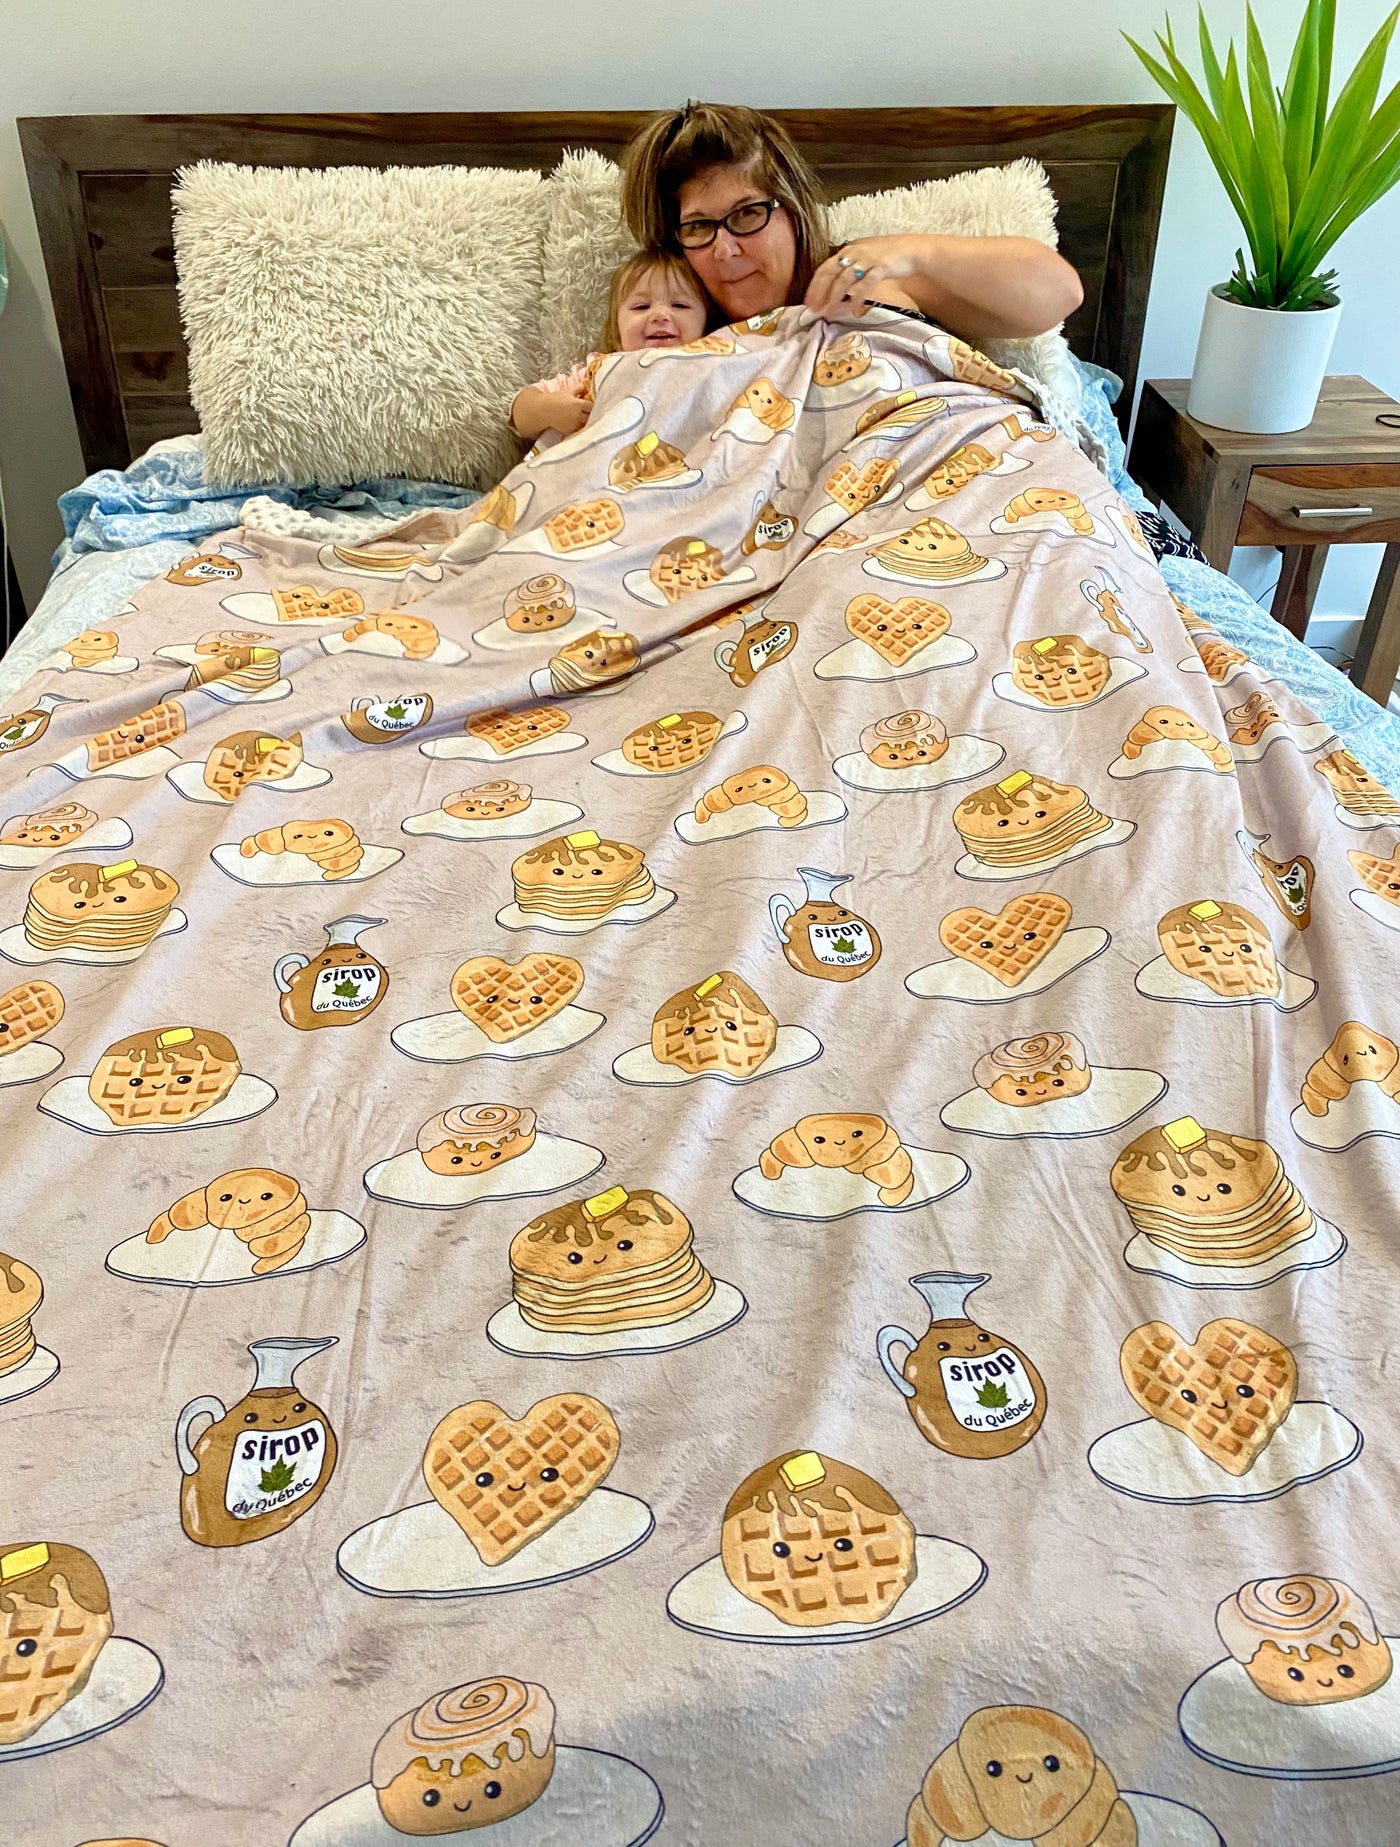 Giant blanket: Delicious Pancakes with Maple Syrup